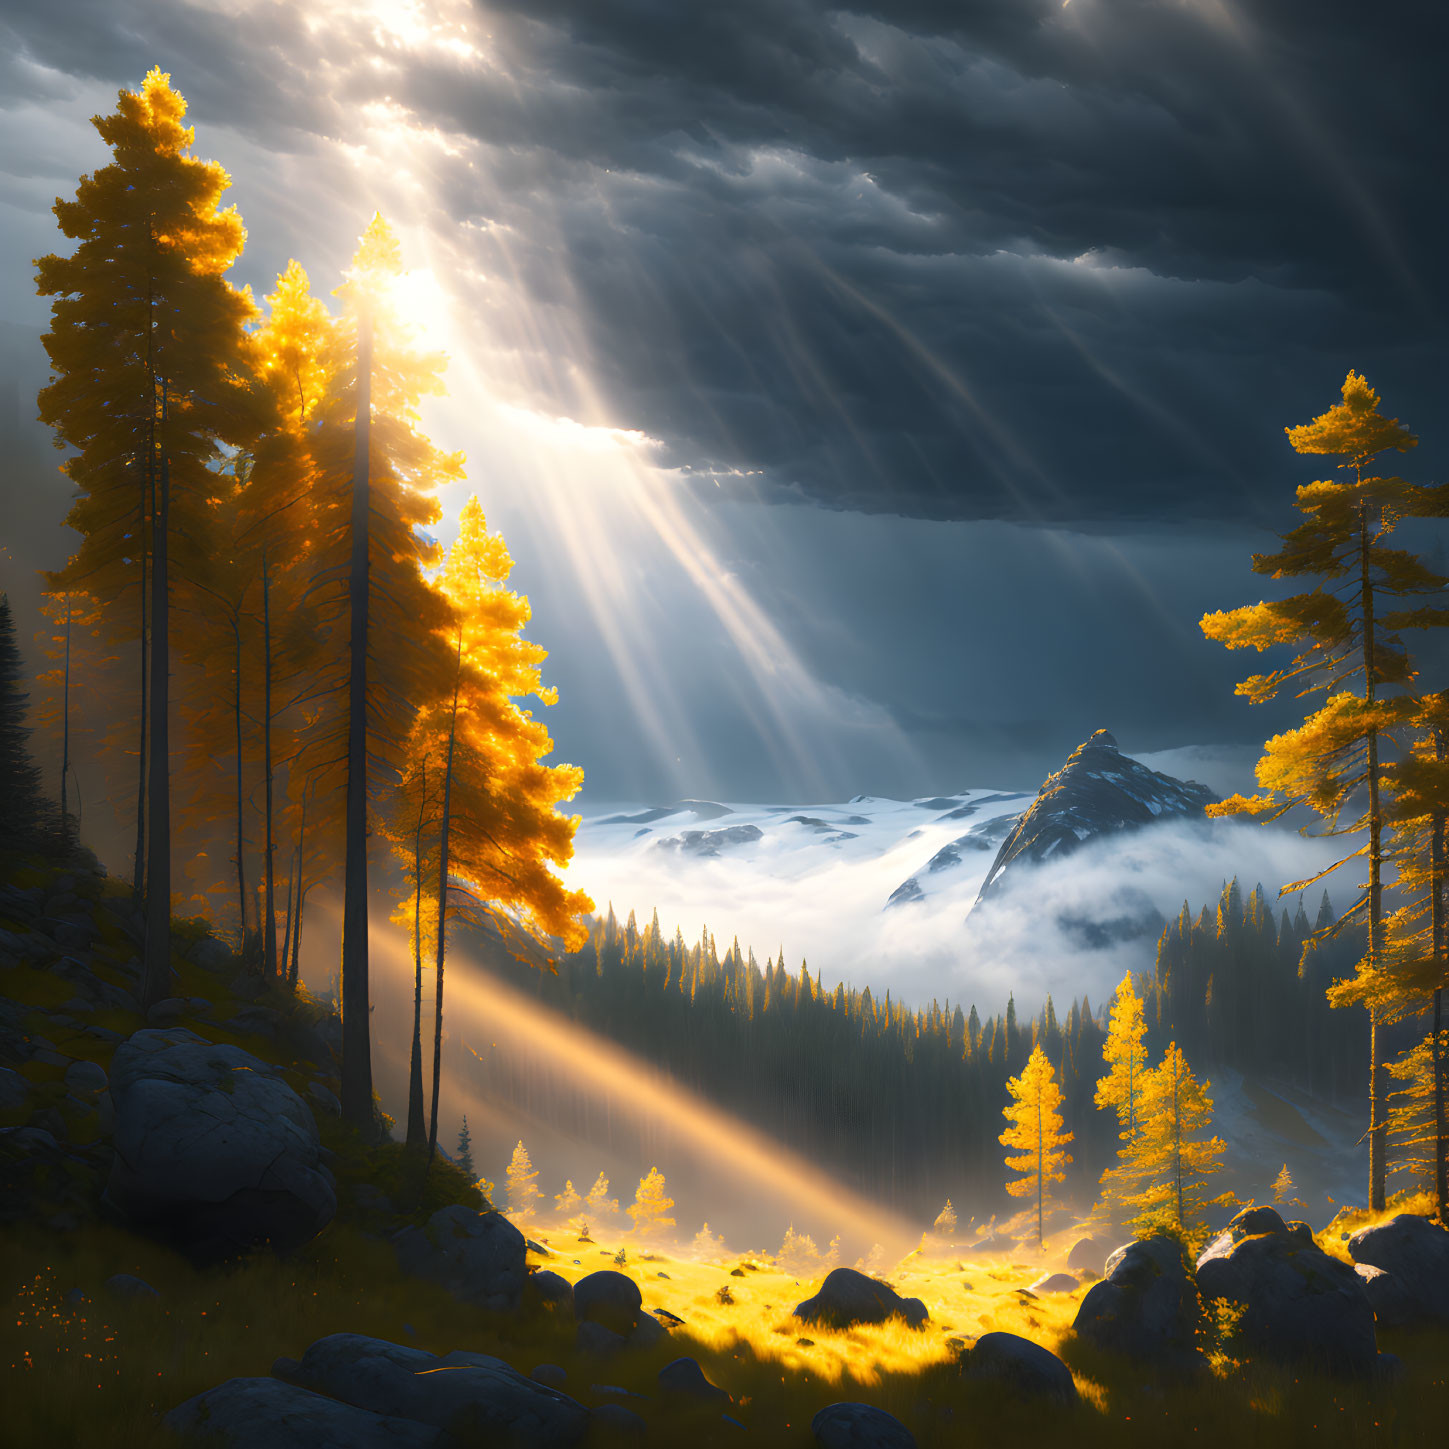 Sunbeams Illuminate Misty Forest with Snow-Capped Mountain